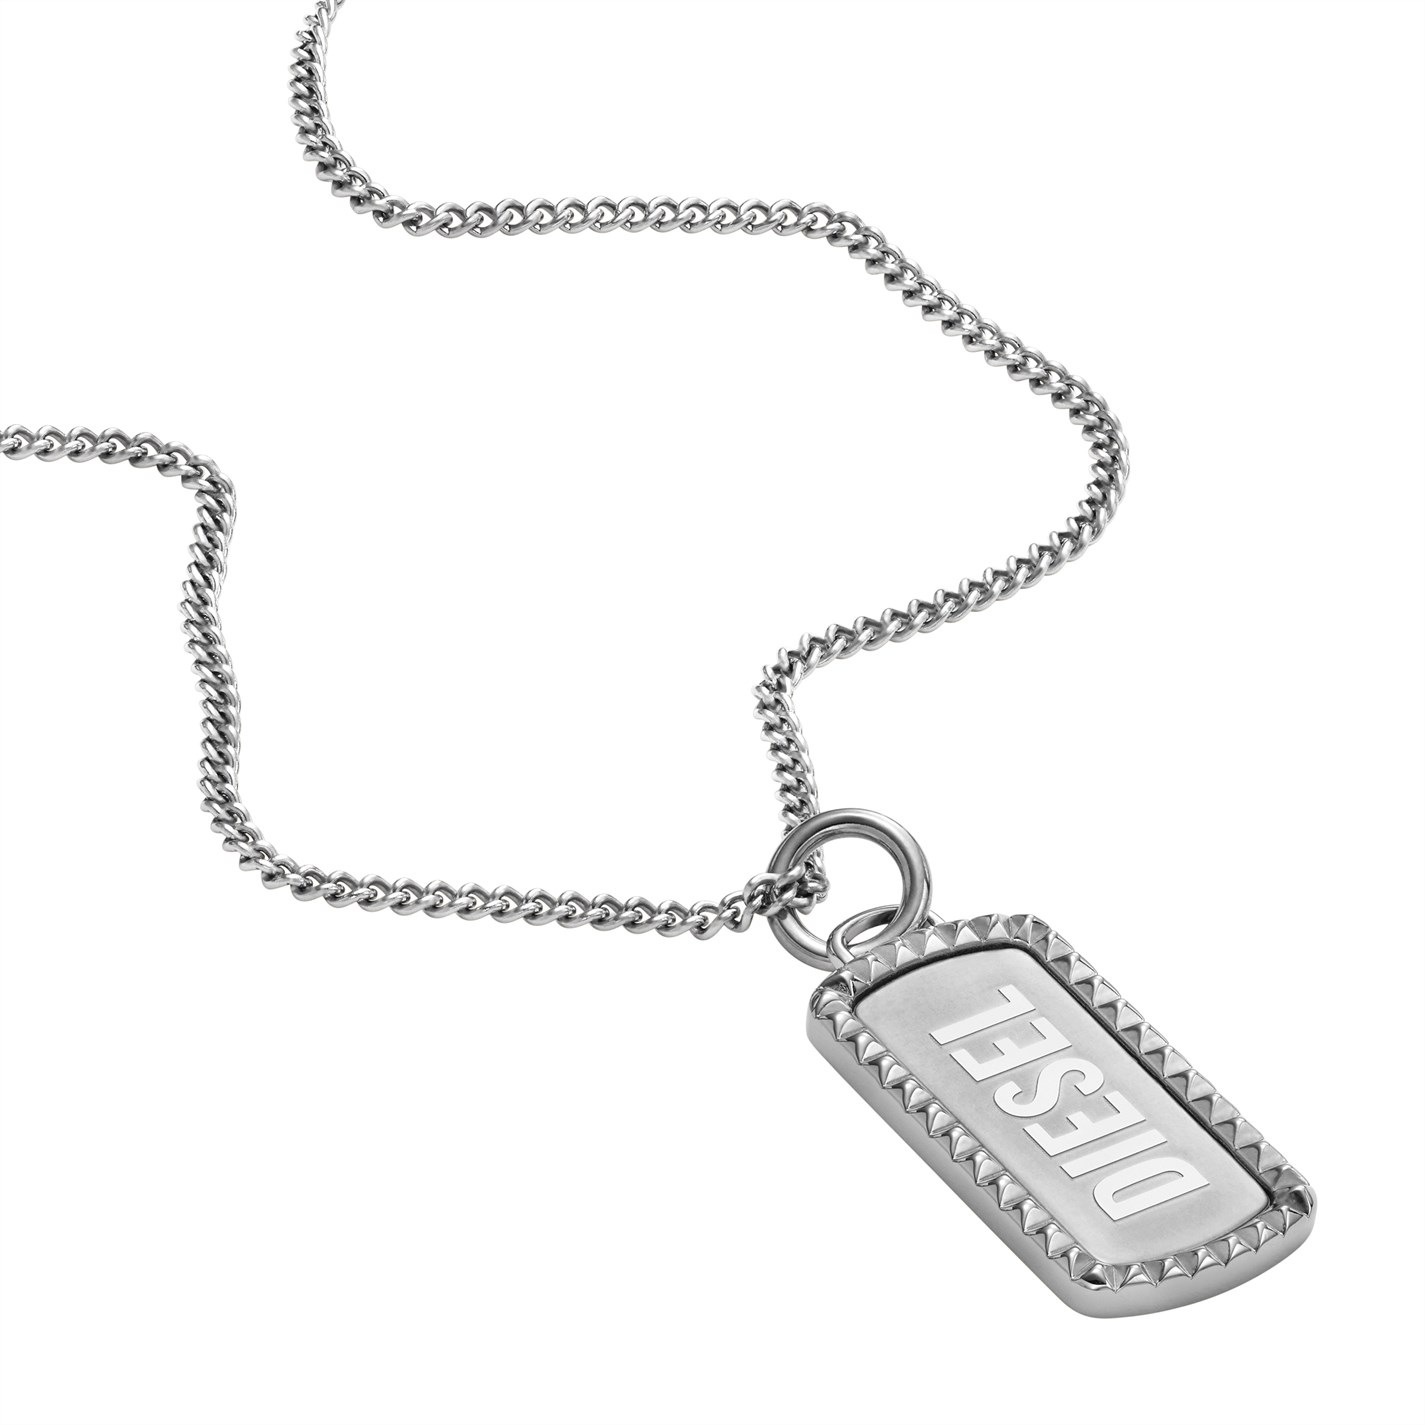 DIESEL STAINLESS STEEL DOG TAG NECKLACE - 1